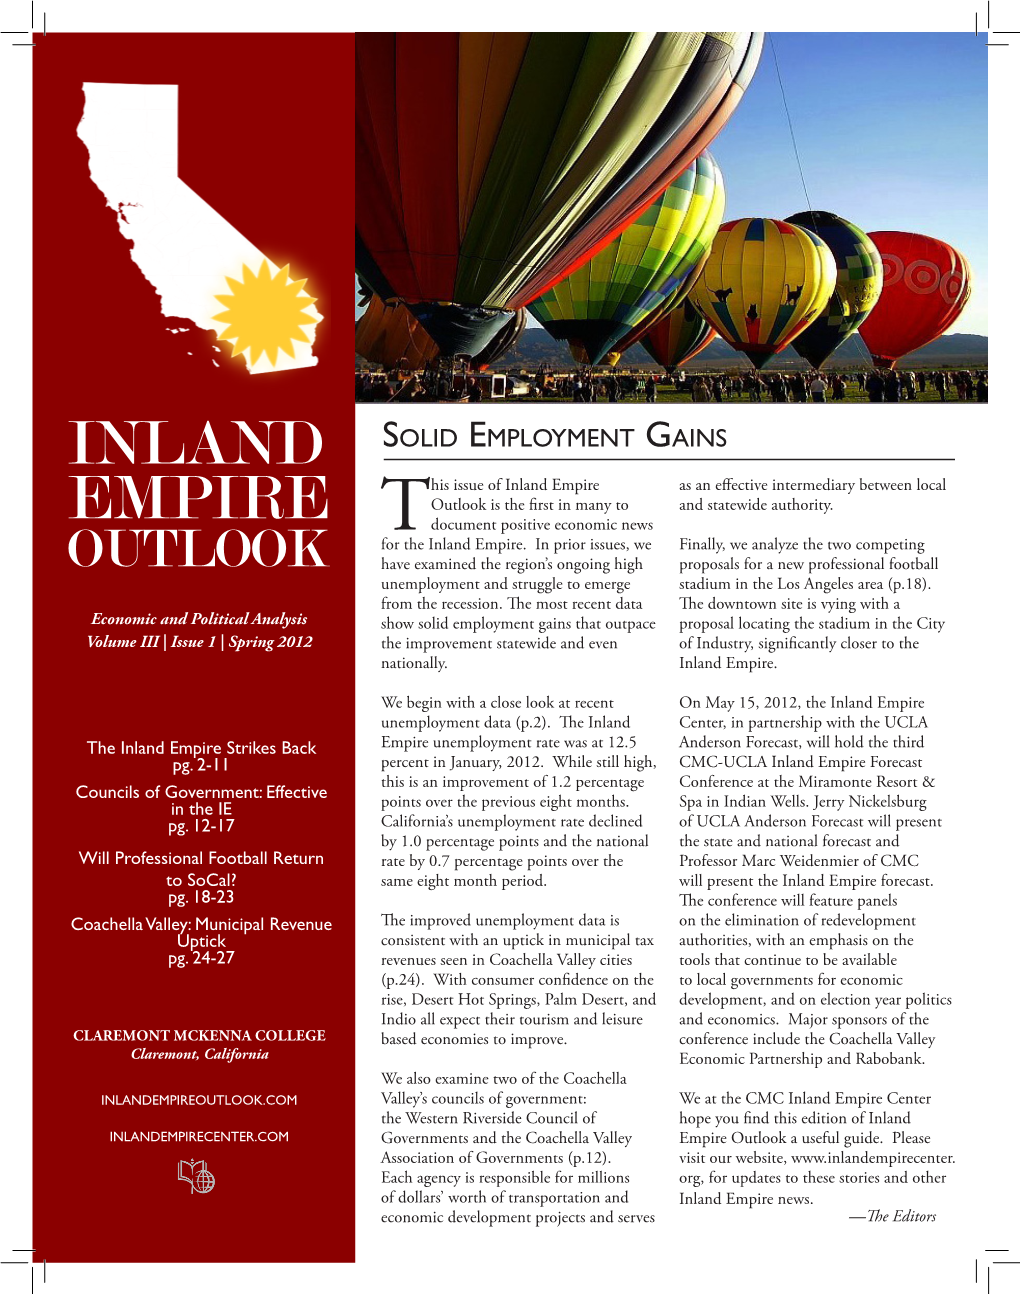 Inland Empire As an Effective Intermediary Between Local EMPIRE Outlook Is the First in Many to and Statewide Authority